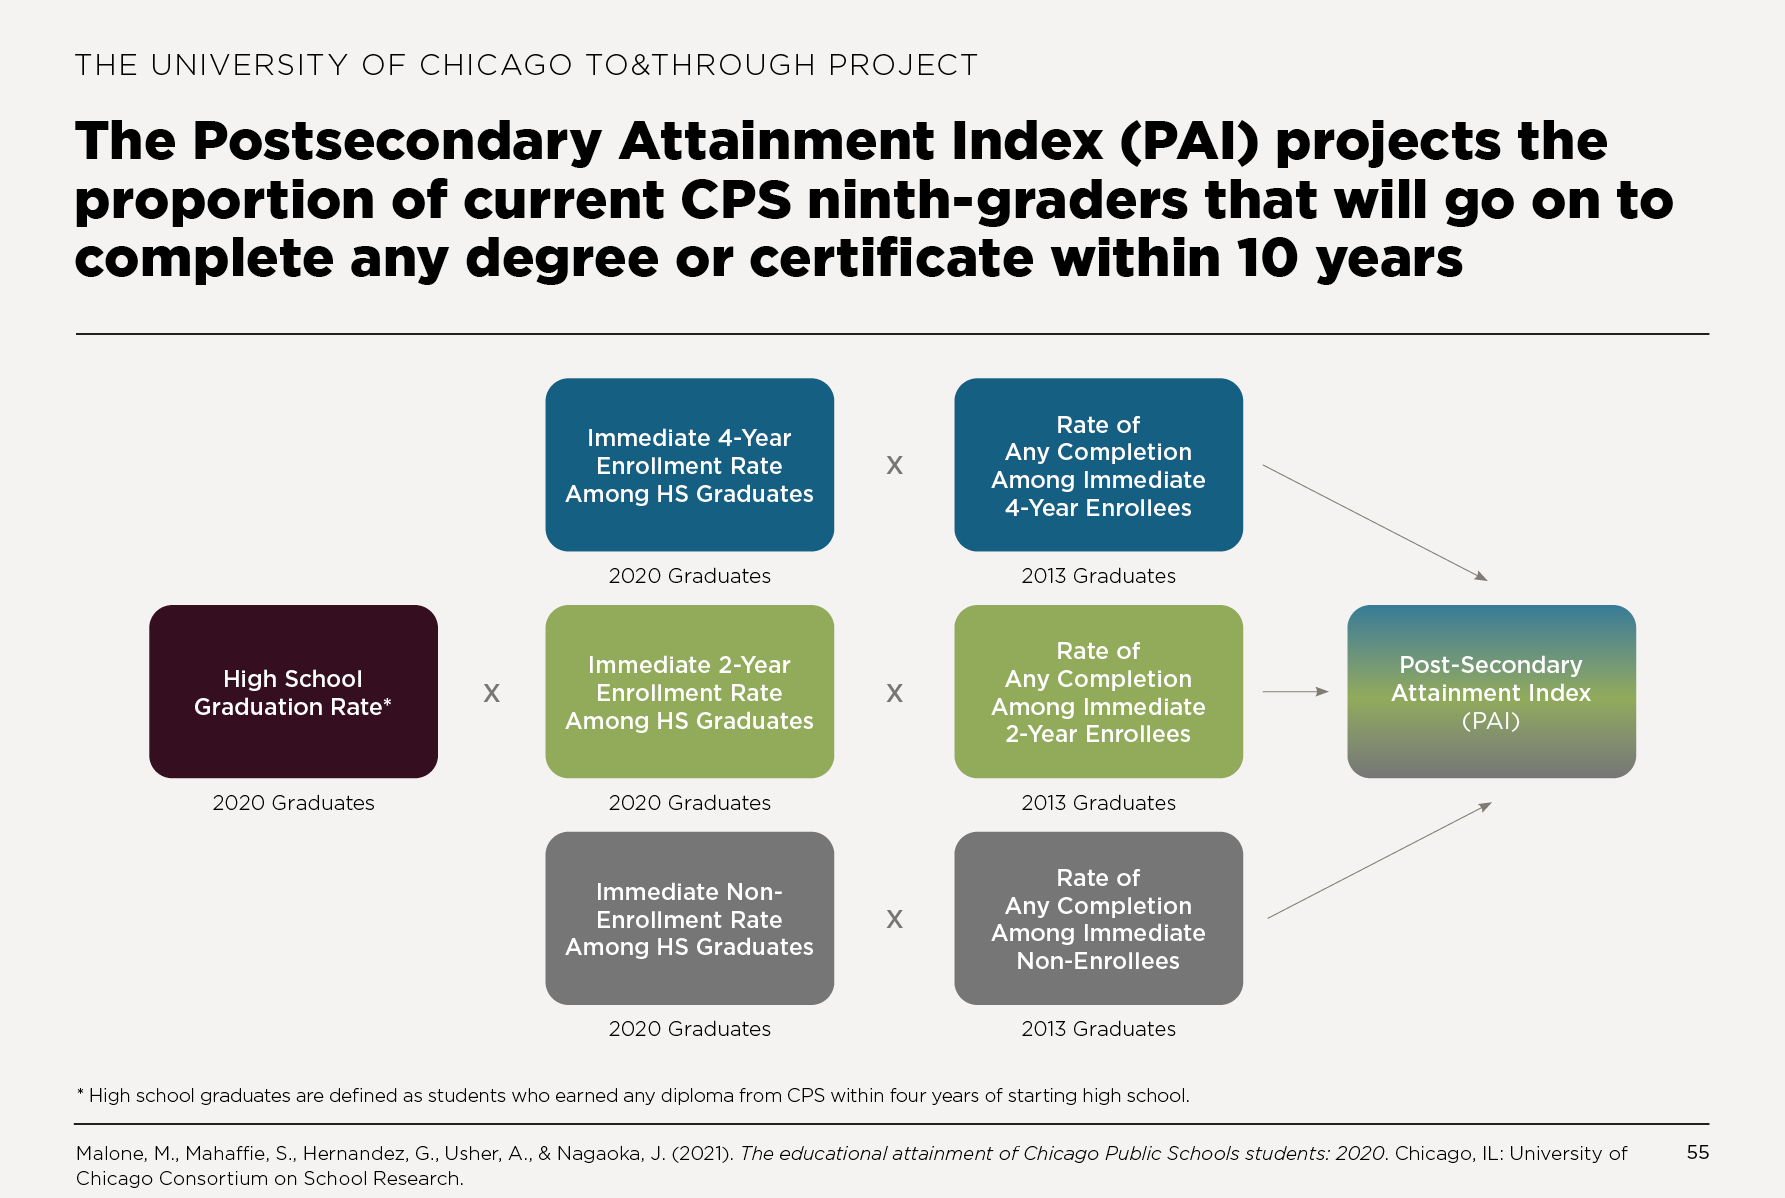 The Postsecondary Attainment Index (PAI) projects the proportion of current CPS ninth-graders that will go on to complete any degree or certificate within 10 years